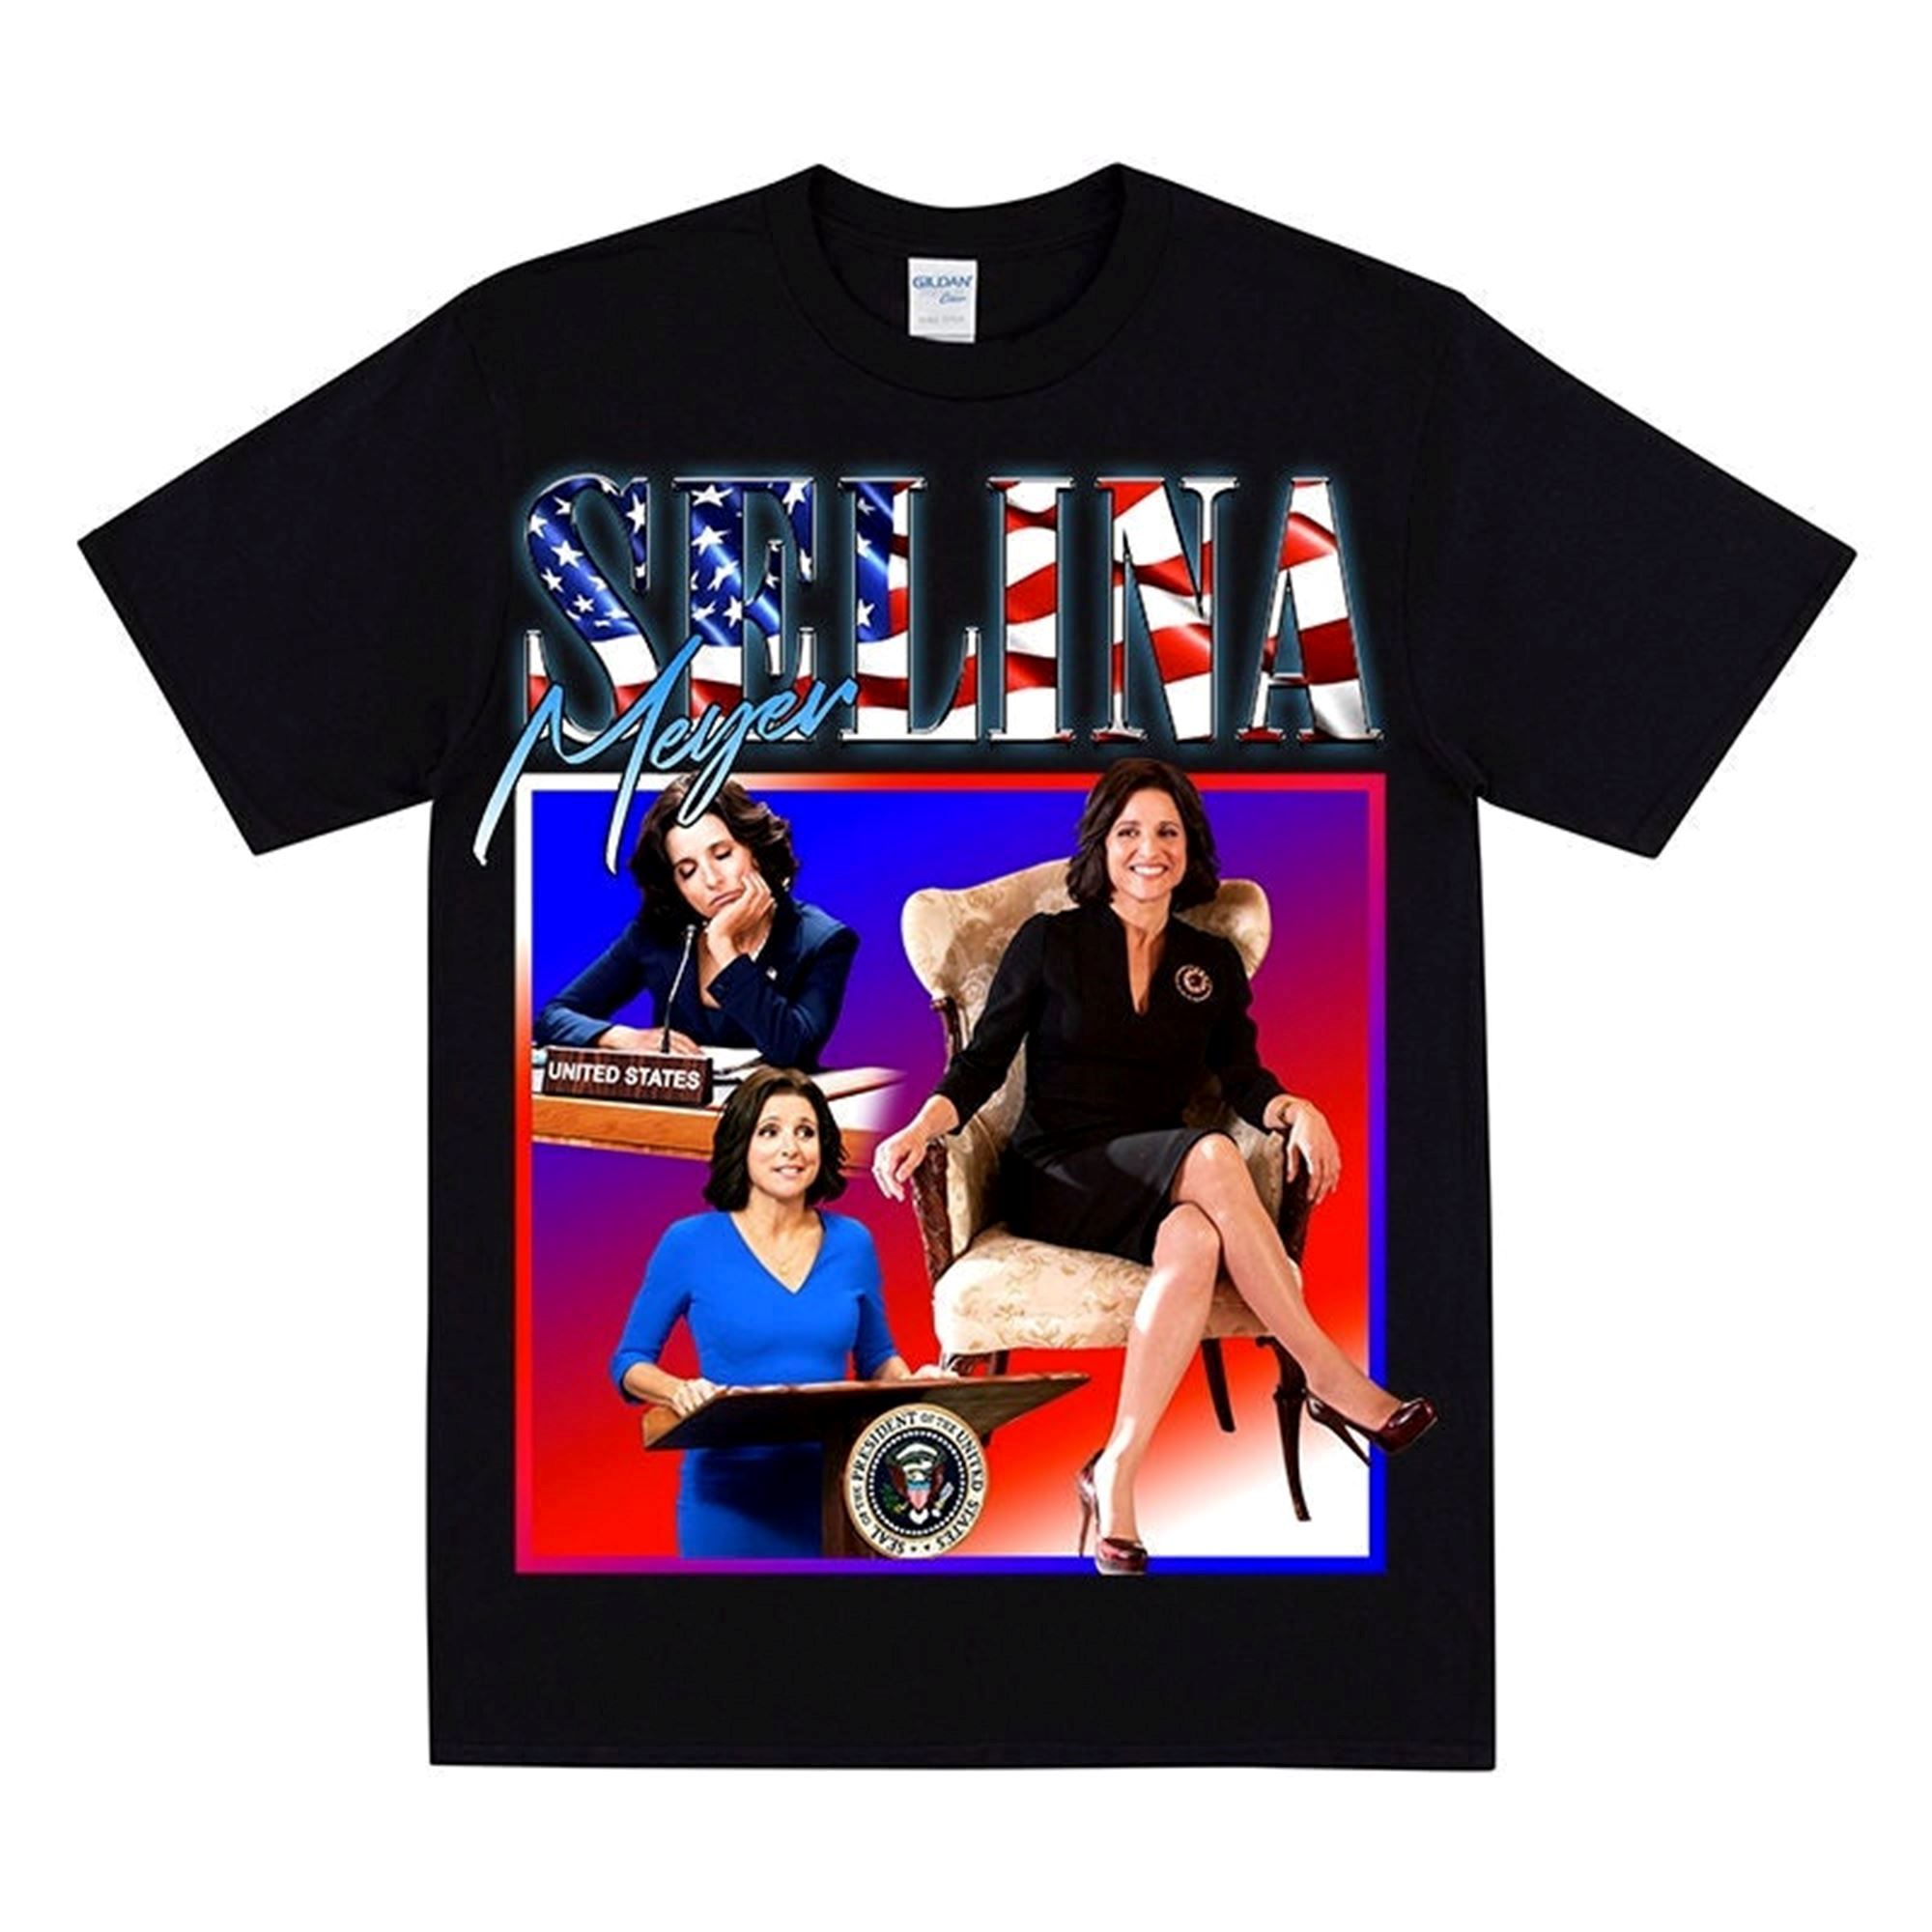 Great Selena Meyer Homage T-shirt Vice President Of The United States For American Sitcom Fans American Politics Themed Gift 